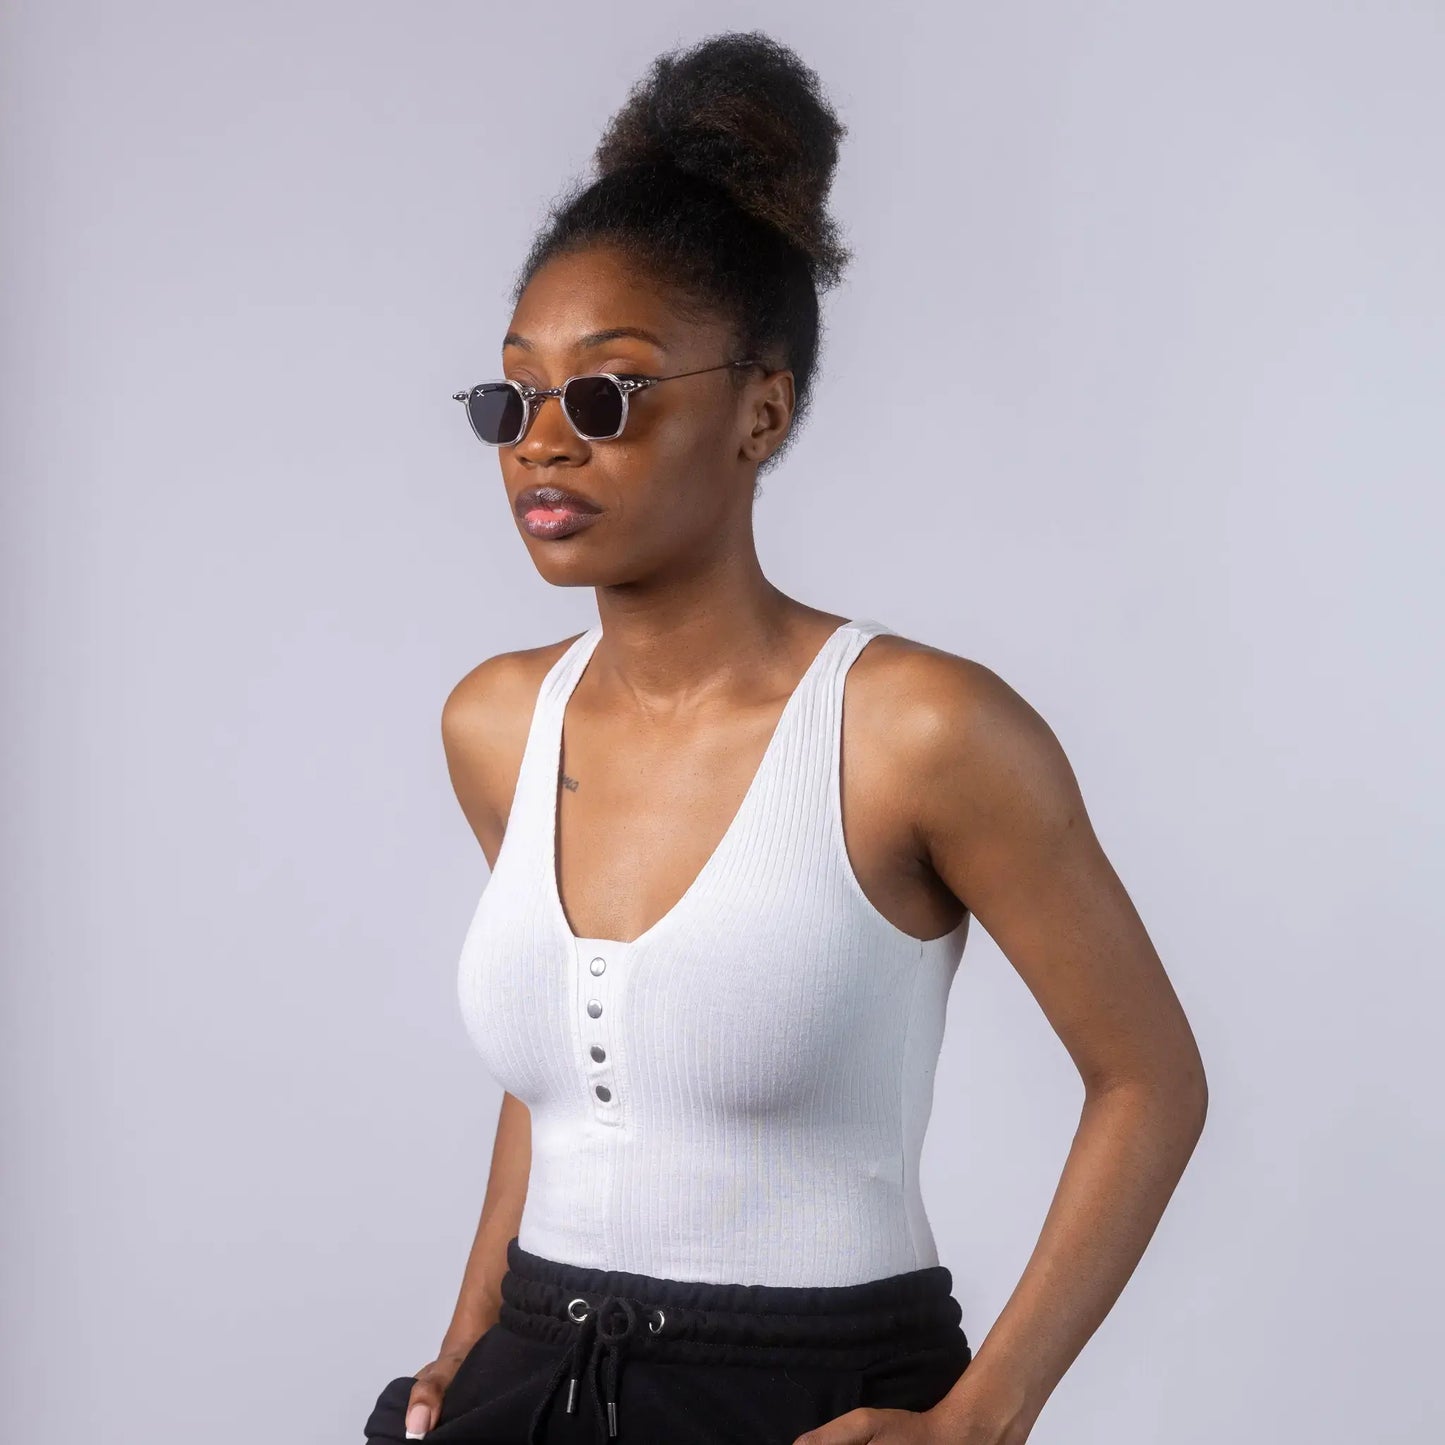 A female model wearing Exposure Sunglasses polarized sunglasses with white frames and black lenses, posing against a white background.